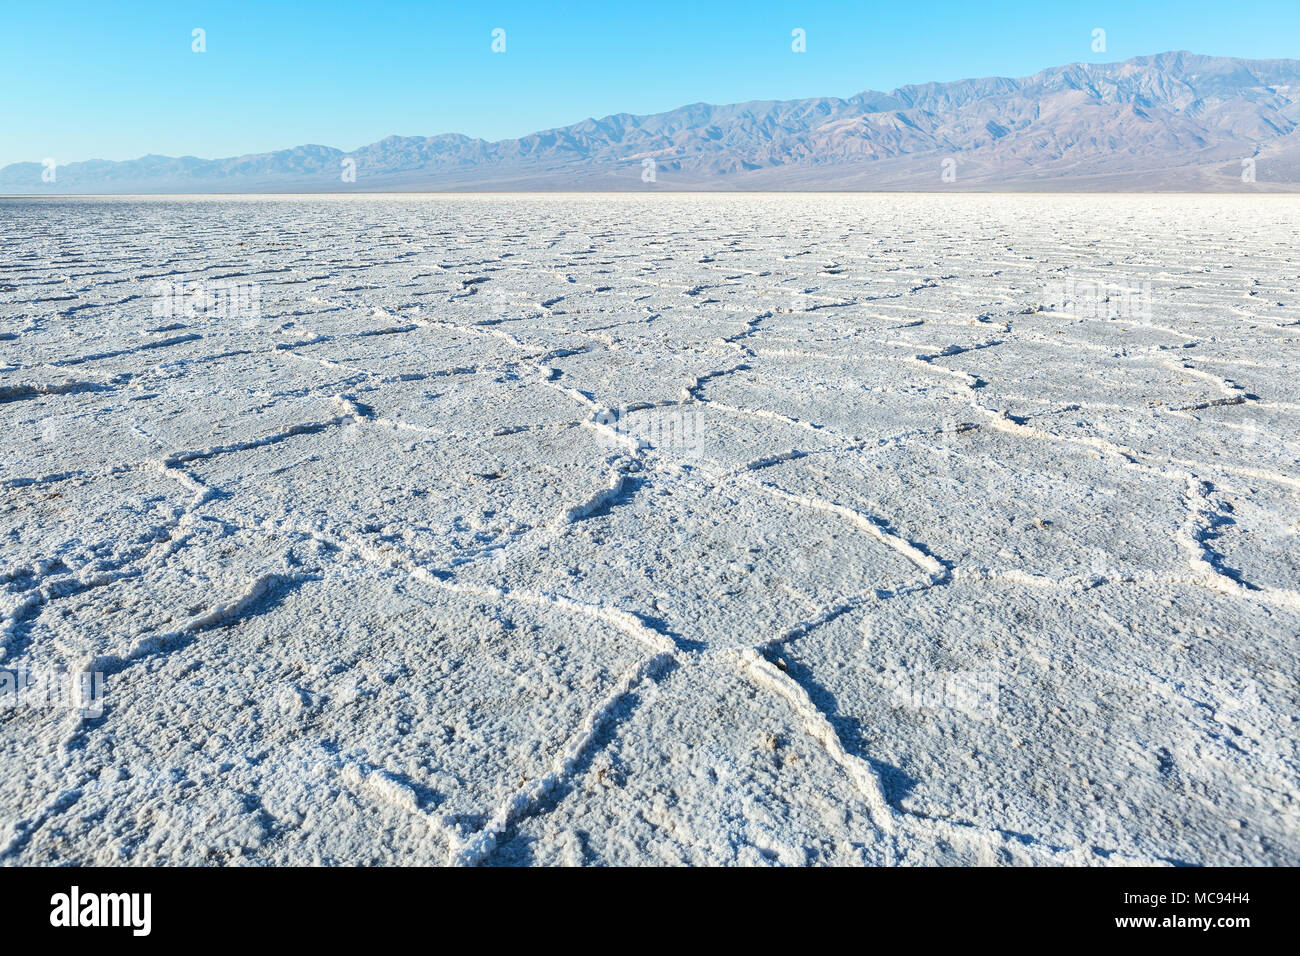 View of the Basins's salt flats,  Death Valley National Park, Death Valley, Inyo County, California, United States. Stock Photo